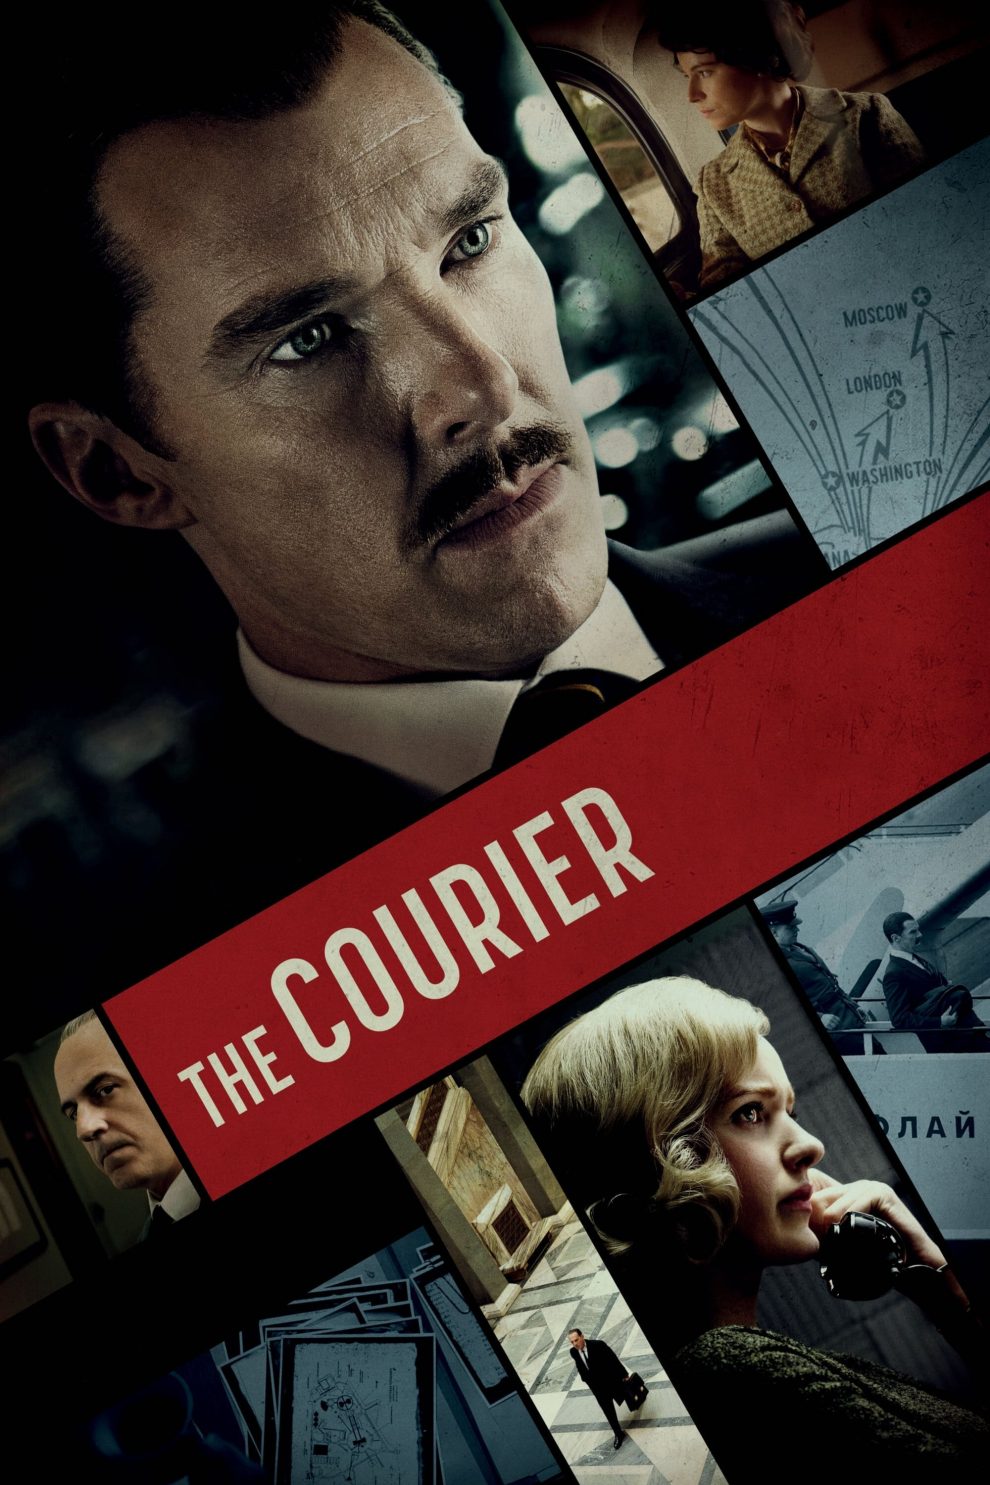 Poster for the movie "The Courier"